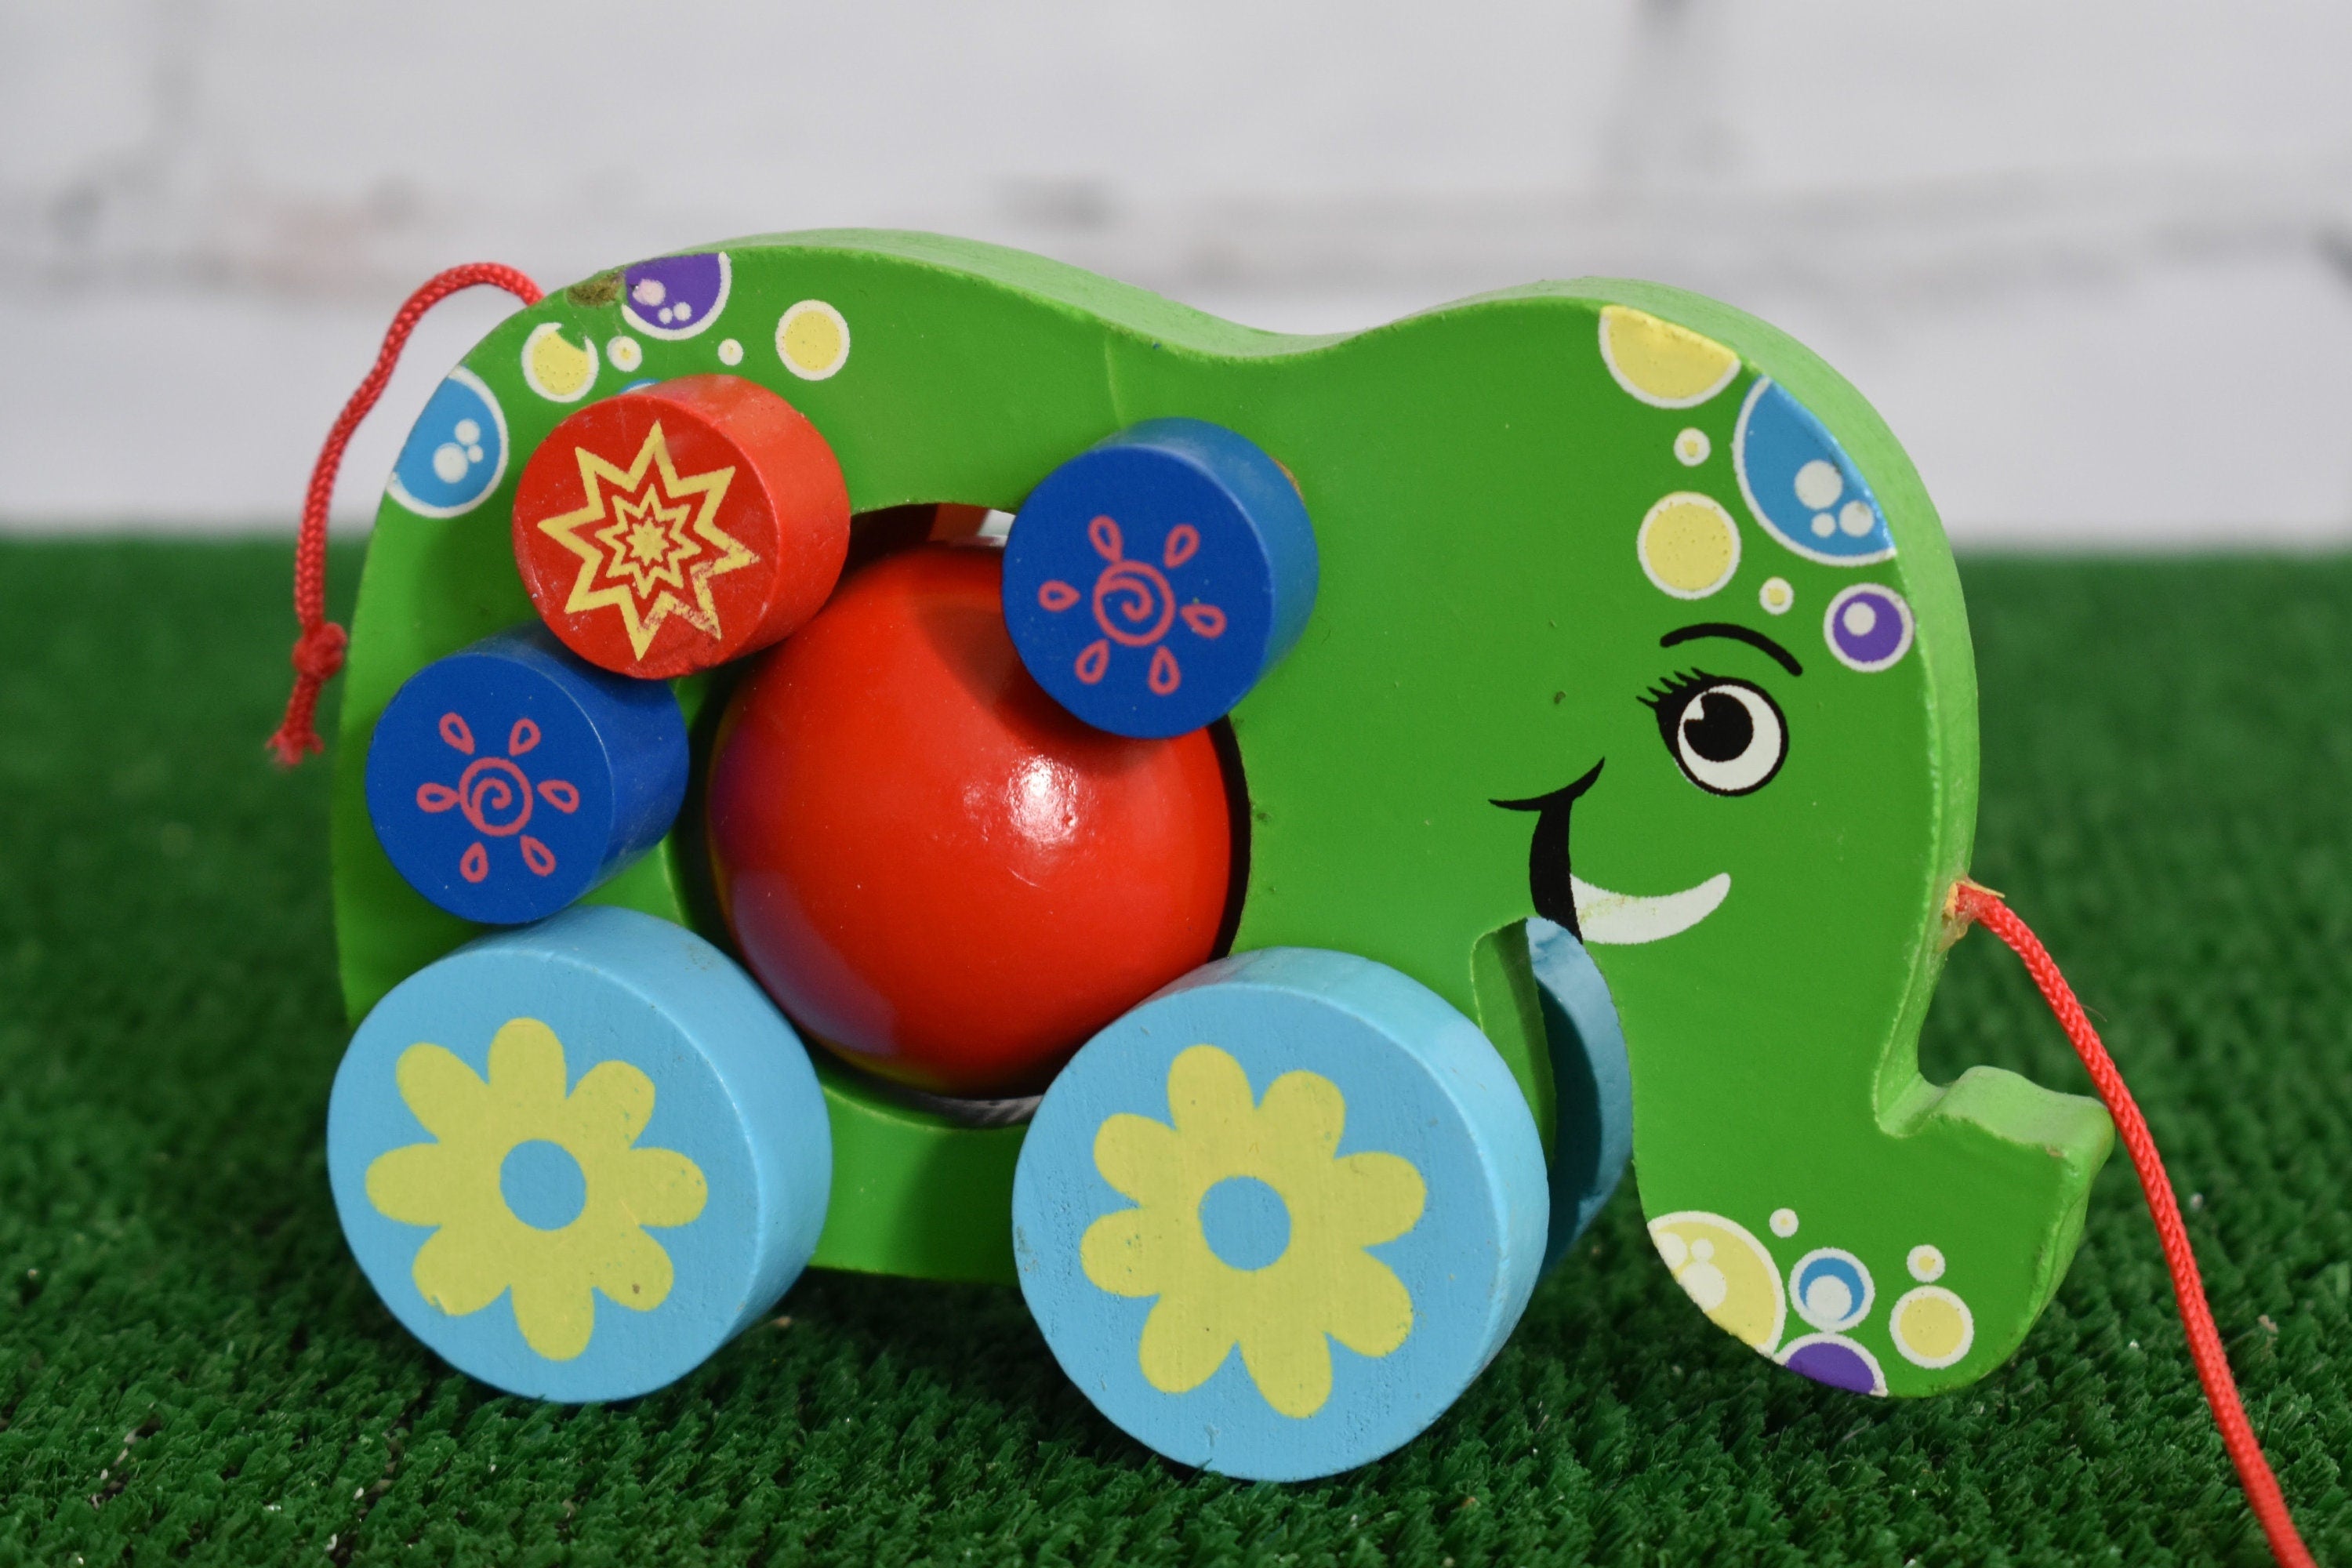 Child-Safe Artistic Handmade Elephant on wheels Ball and string Toddler Wooden Pull Toy